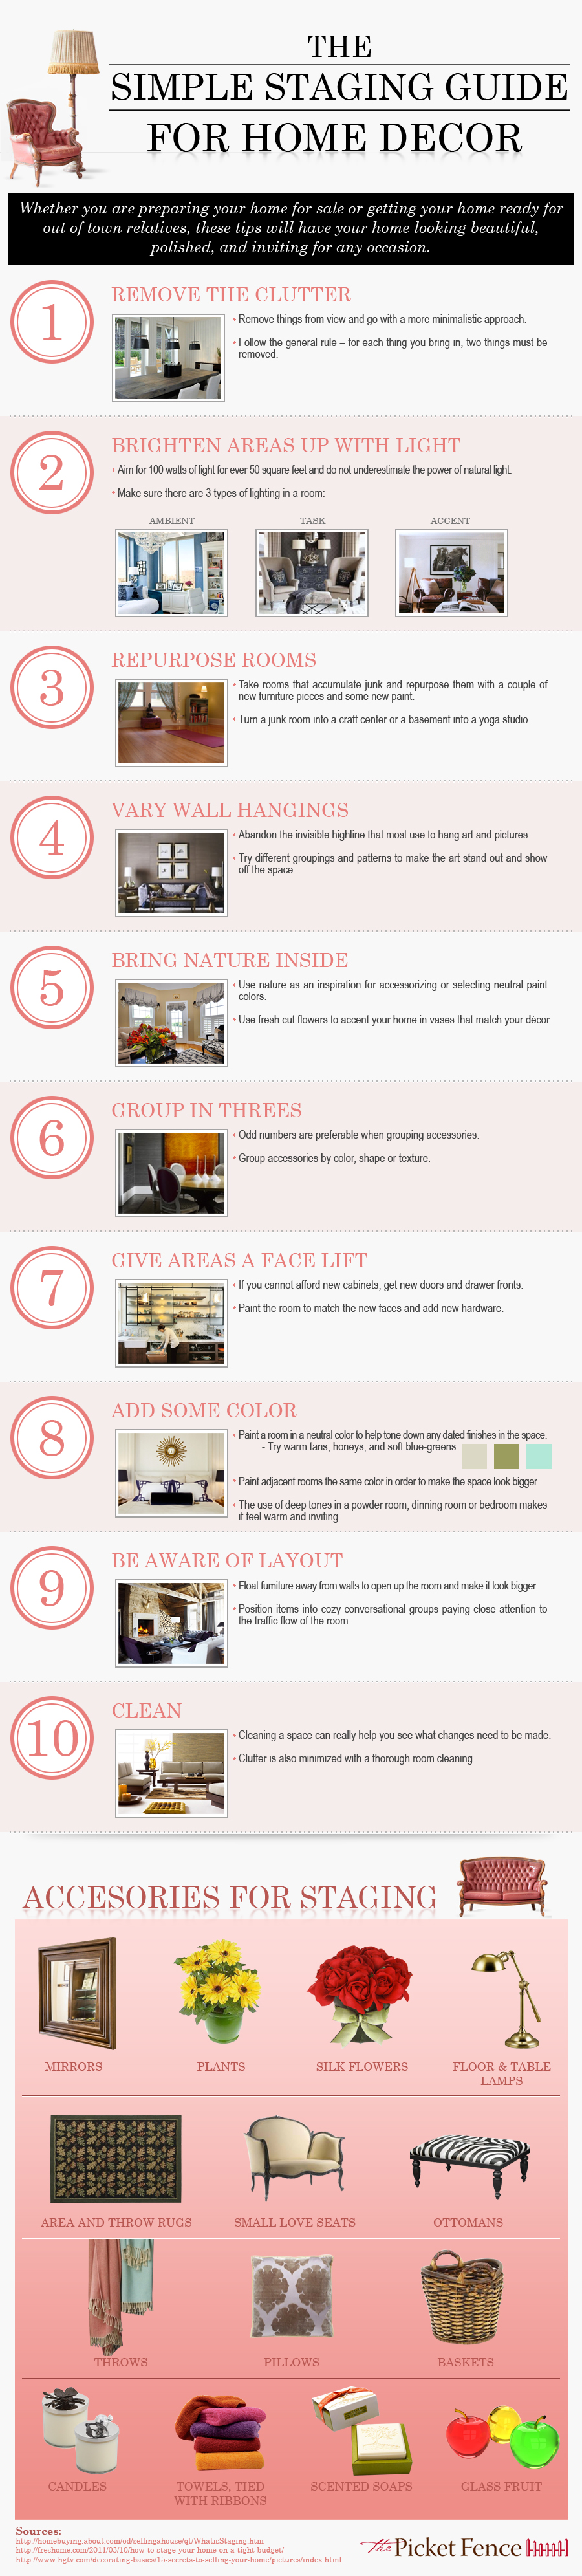 home-staging_infographic_3982